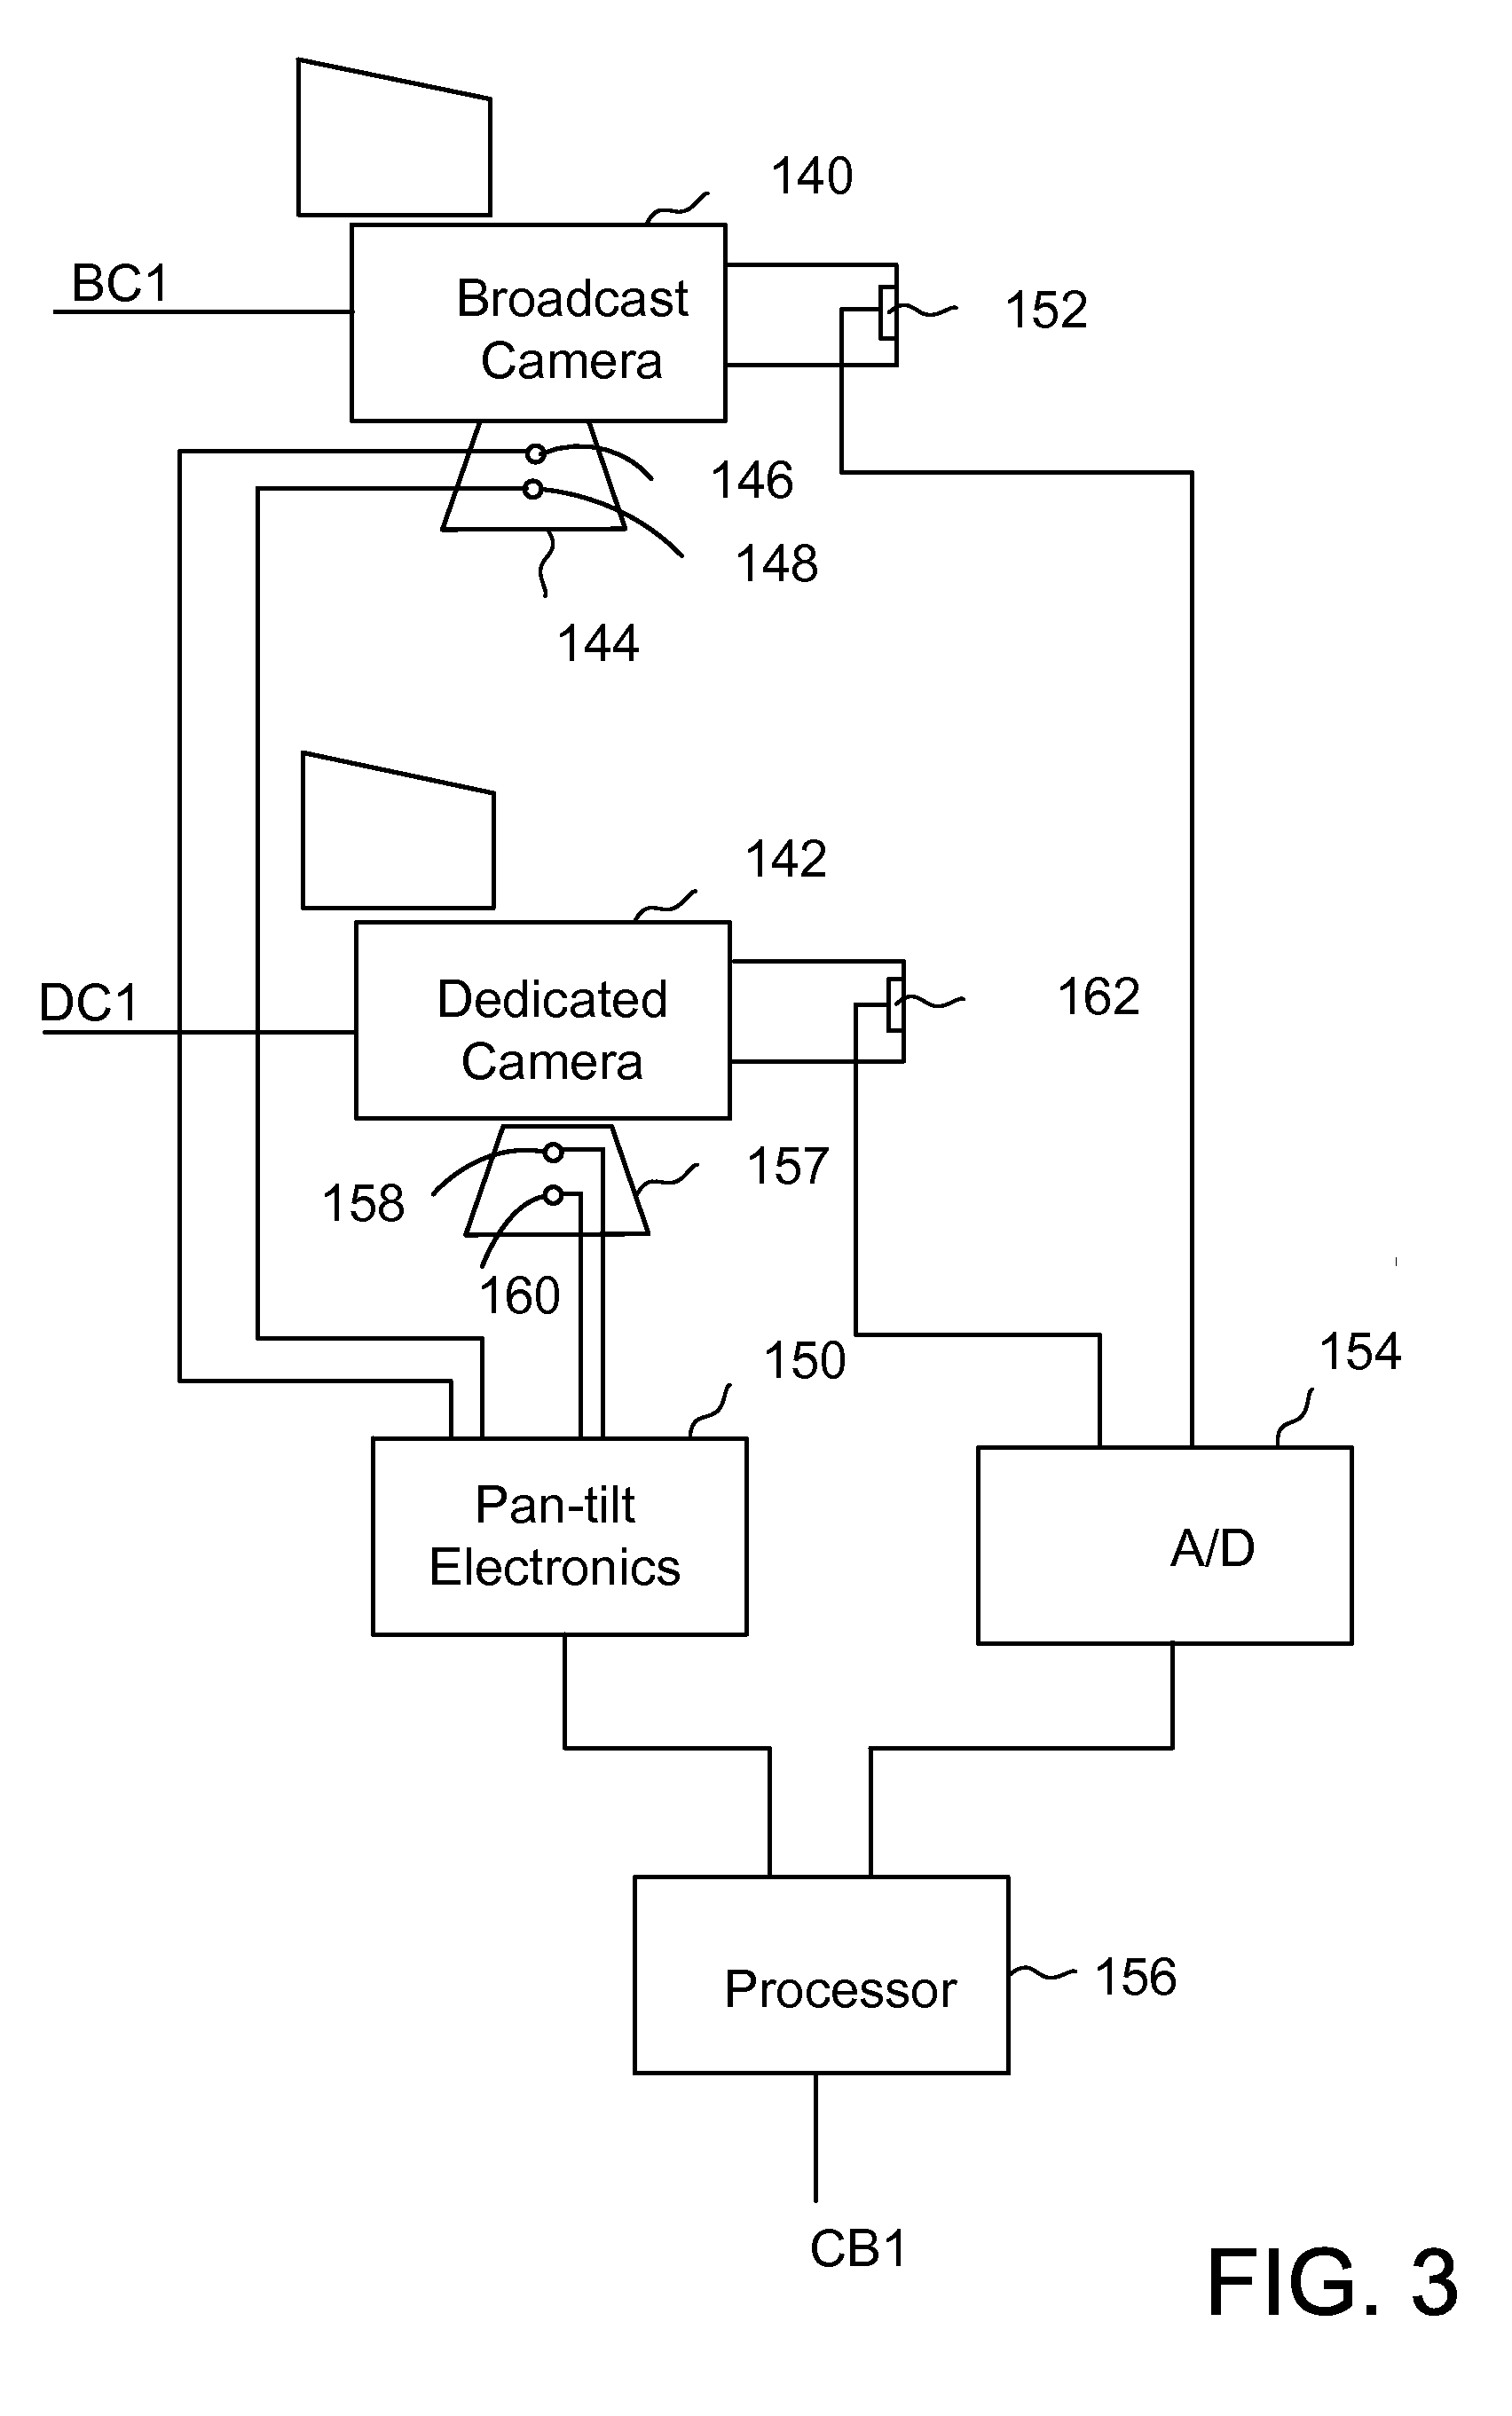 A method and apparatus for enhancing the broadcast of a live event